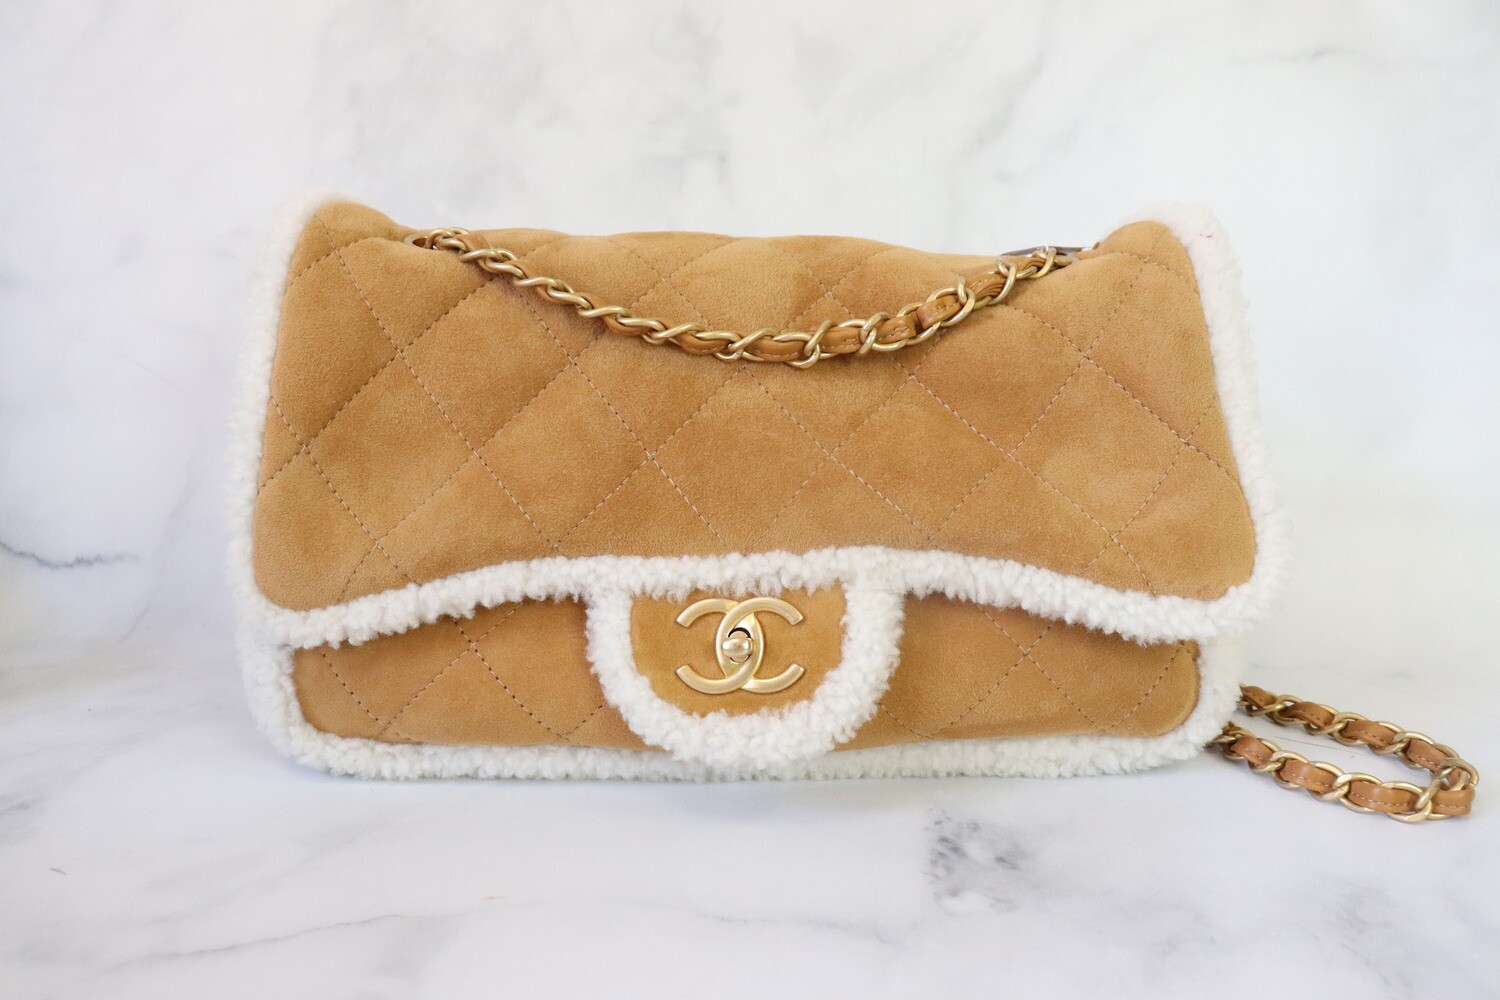 Sarah Tripp Closet Sale Chanel Seasonal 18B Cozy Flap Bag Suede with  Shearling, Preowned in Box